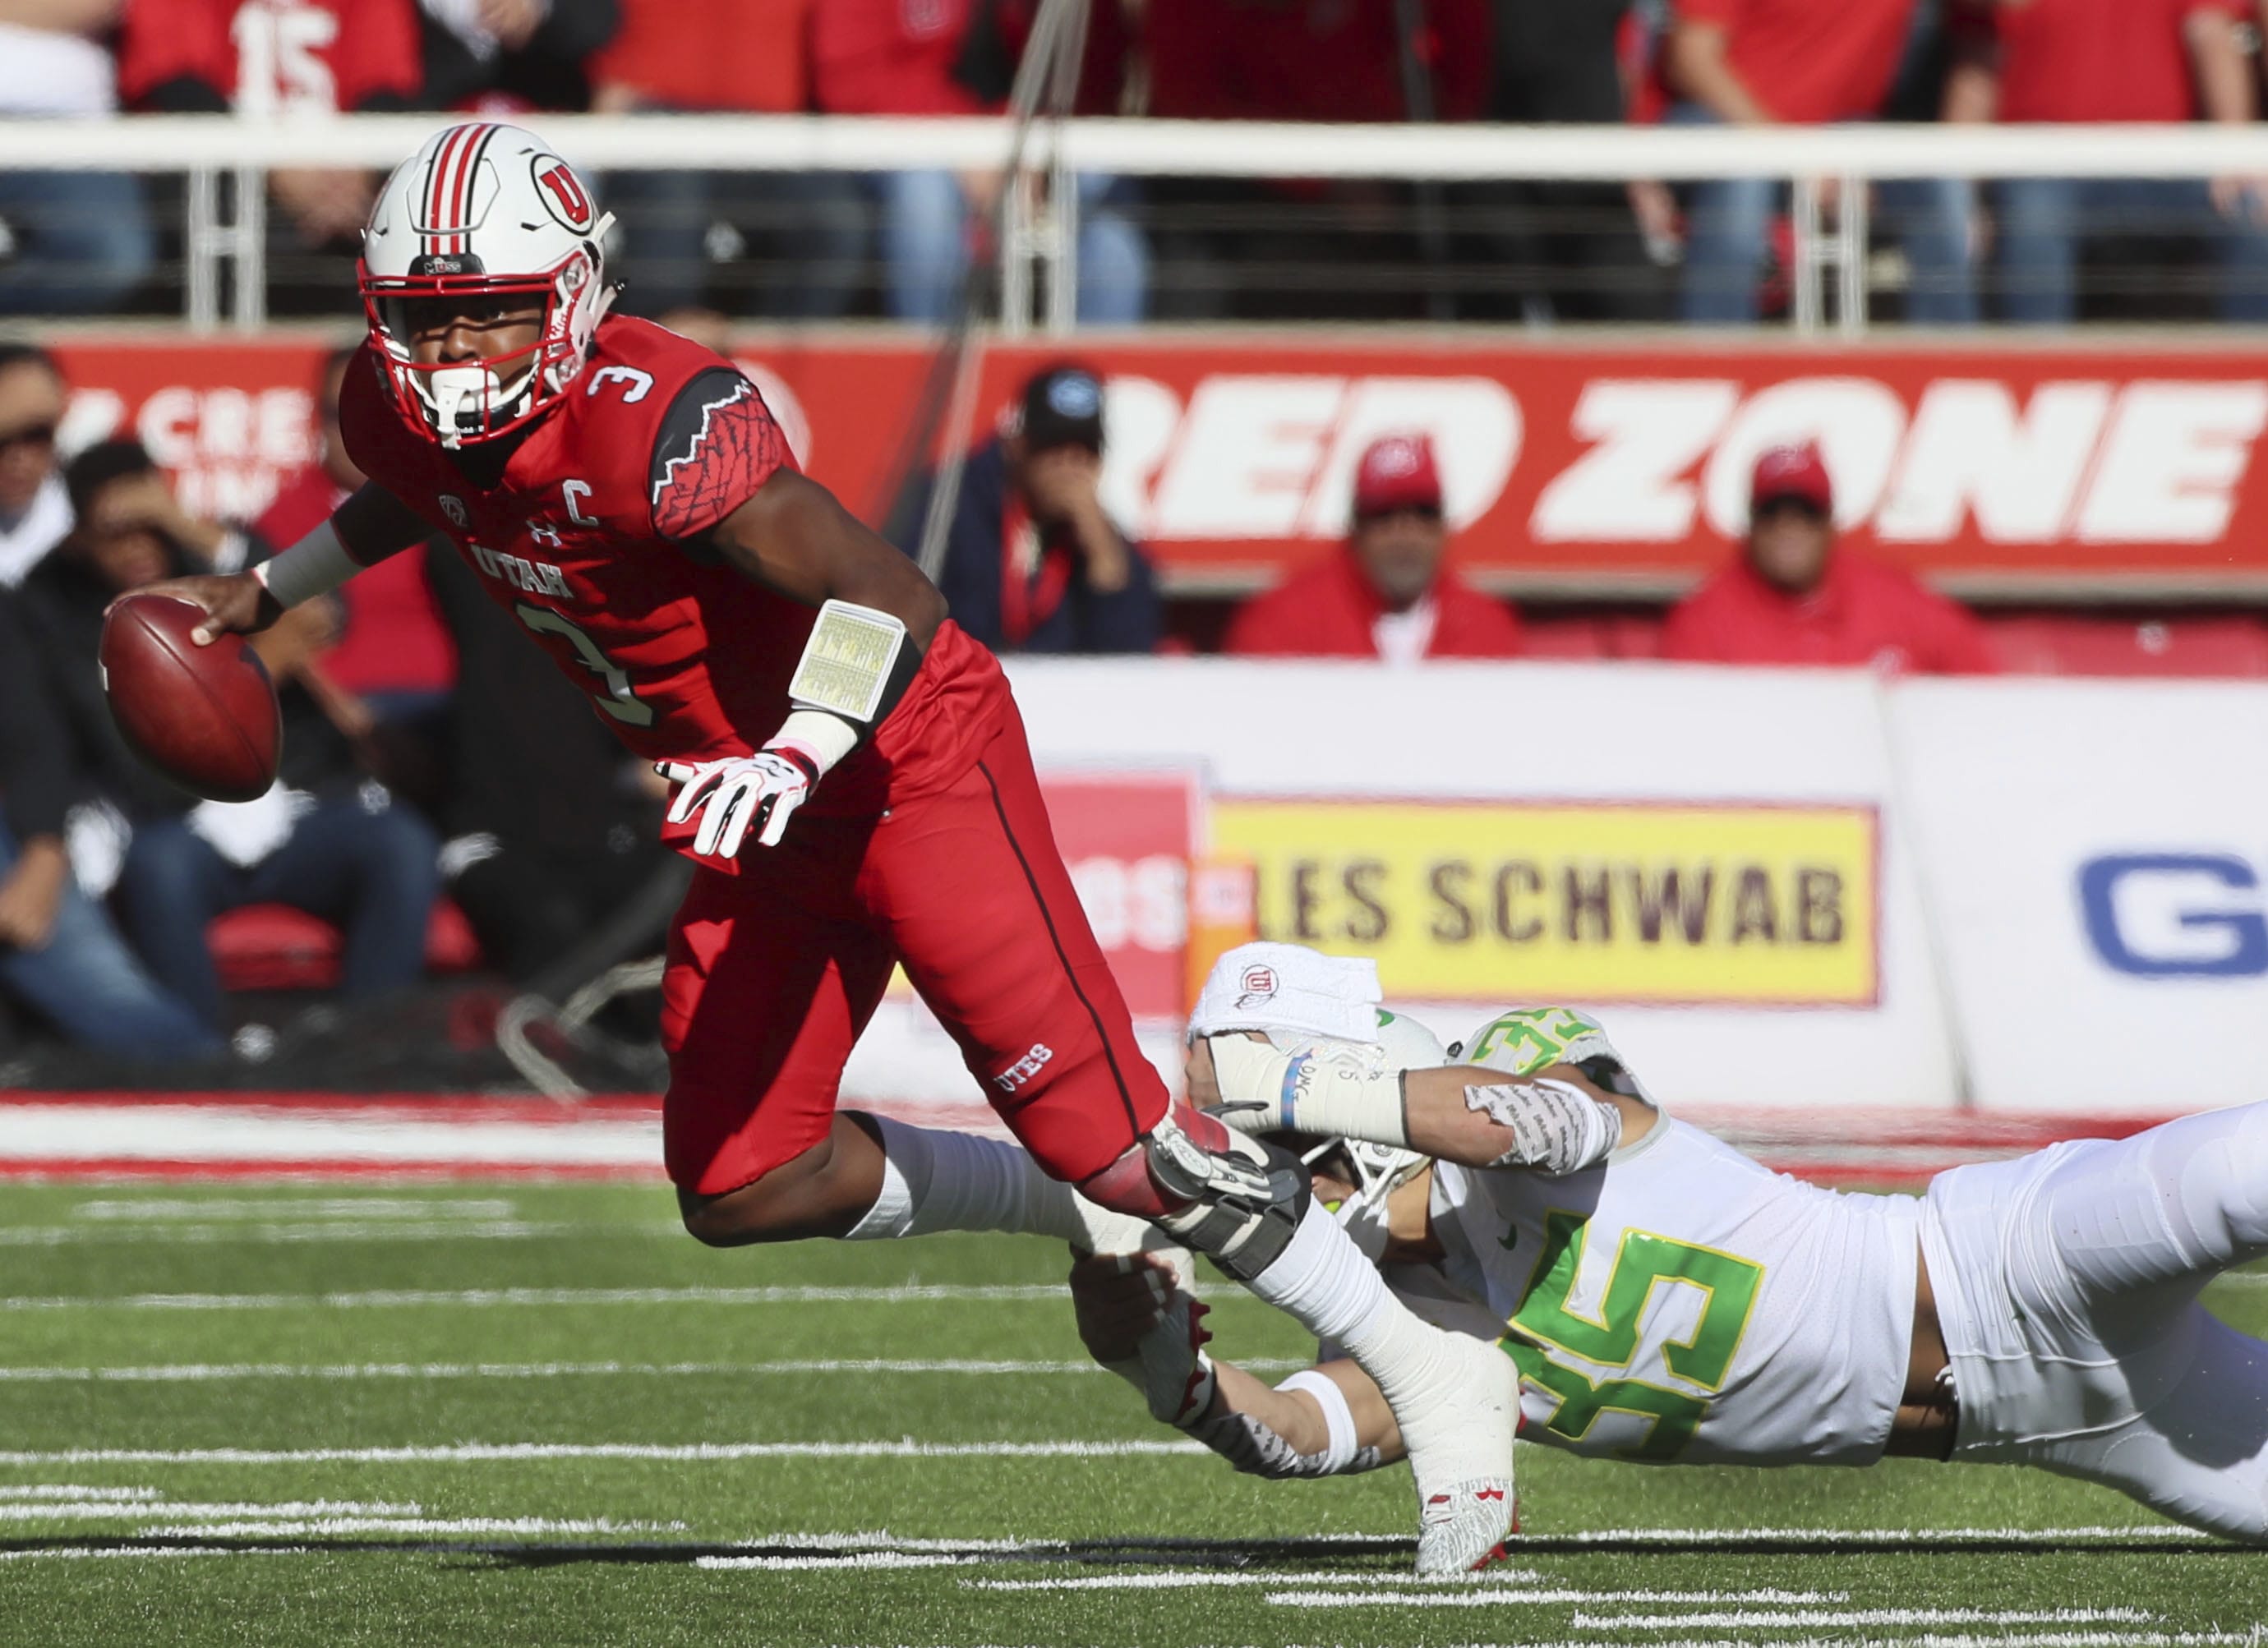 Oregon linebacker Troy Dye (35) dives and sacks Utah quarterback Troy Williams (3) in the first half of an NCAA college football game, Saturday, Nov. 19, 2016, in Salt Lake City.